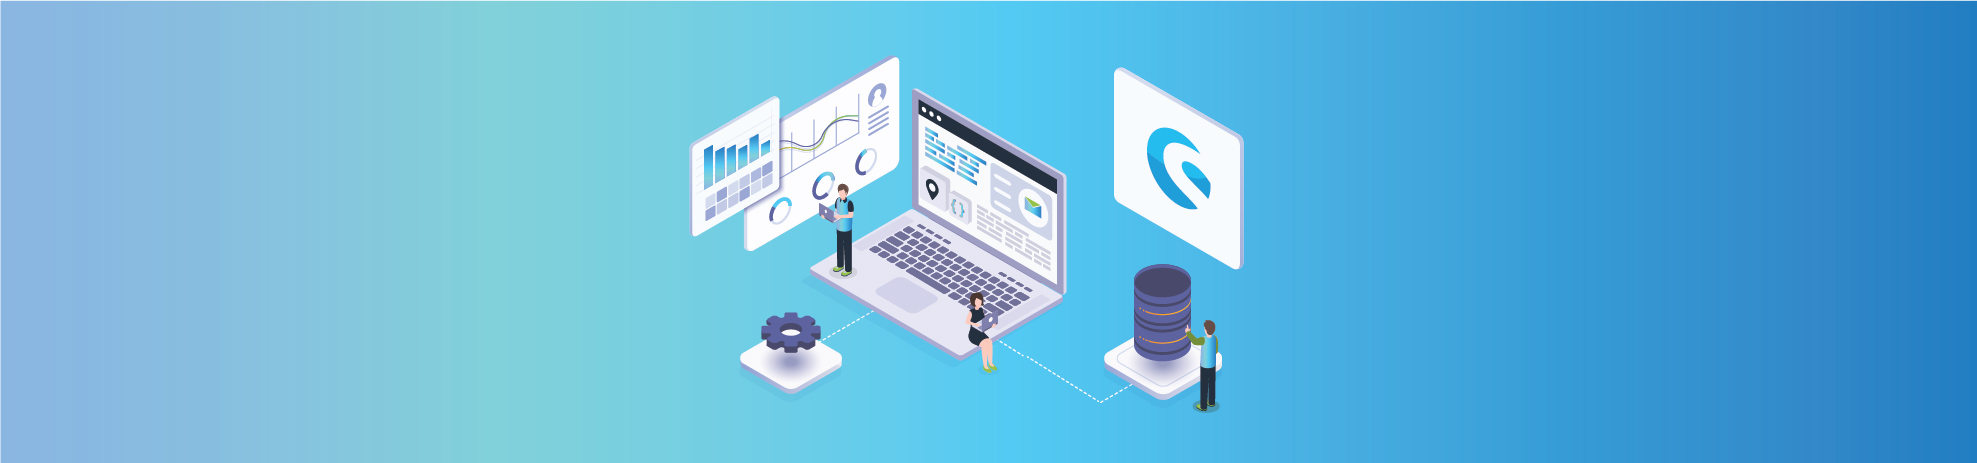 Shopware Introduction 2021 – Everything You Need To Know About Shopware